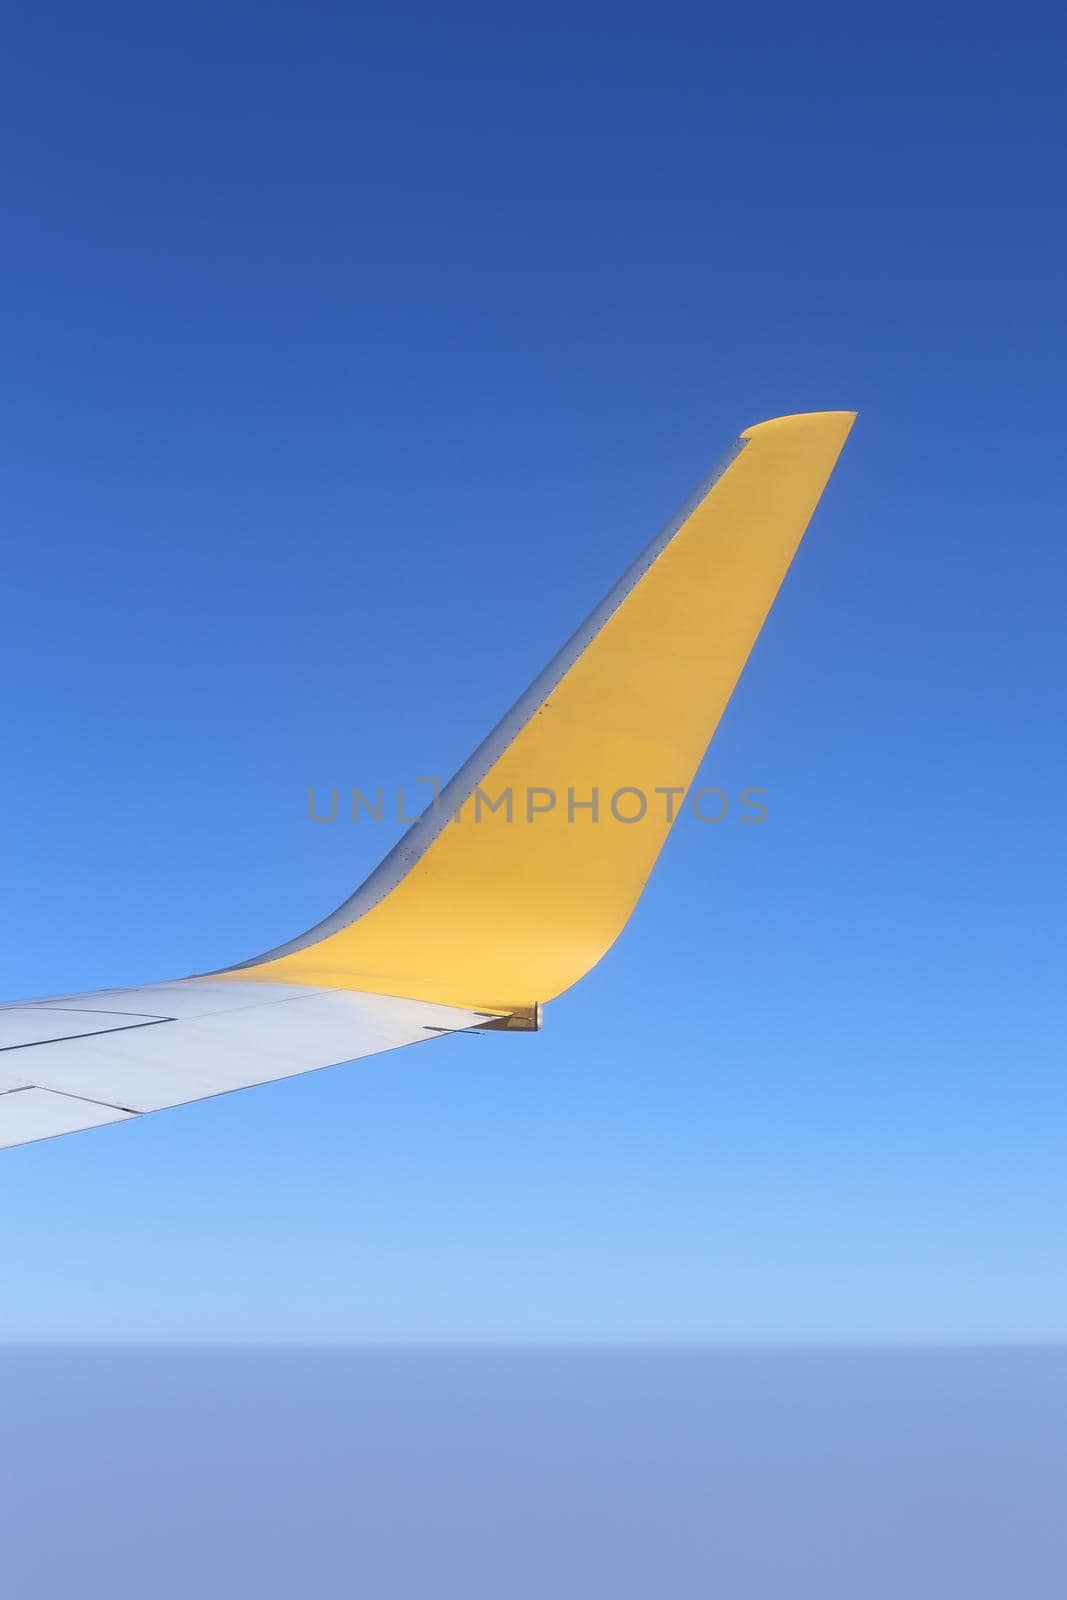 Wing of an airplane flying above the sky